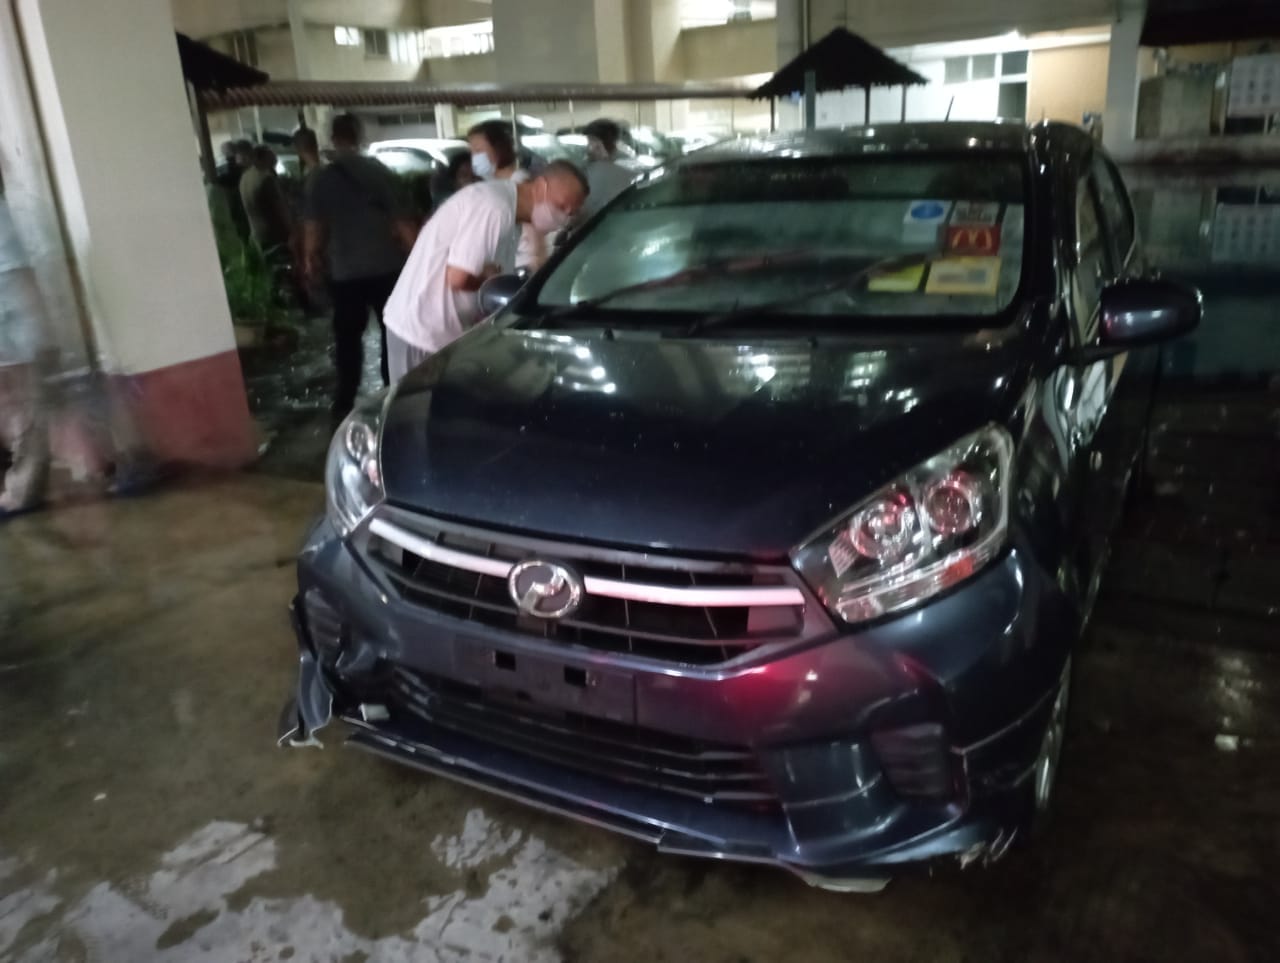 Man drives his car into kl condo swimming pool due to poor visibility2